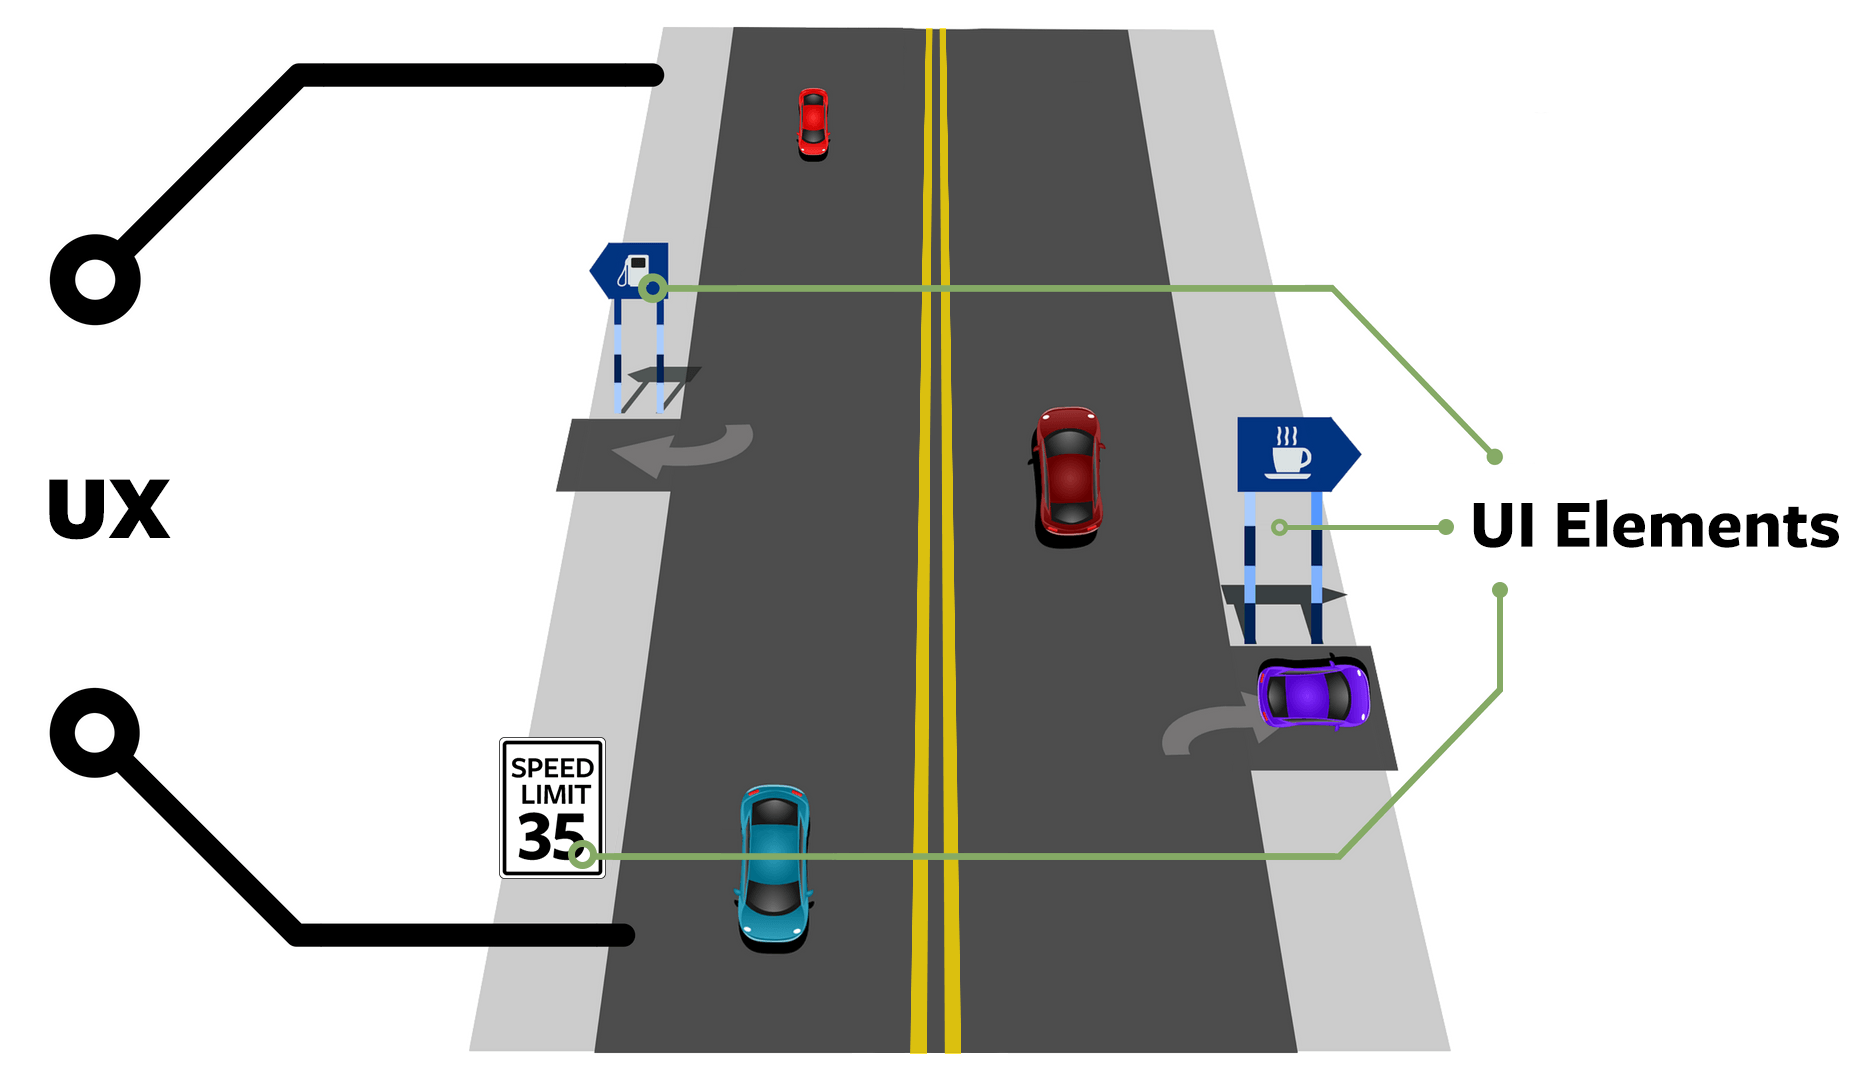 A diagram showing road signs and indicators as an illustration of UX and UI elements